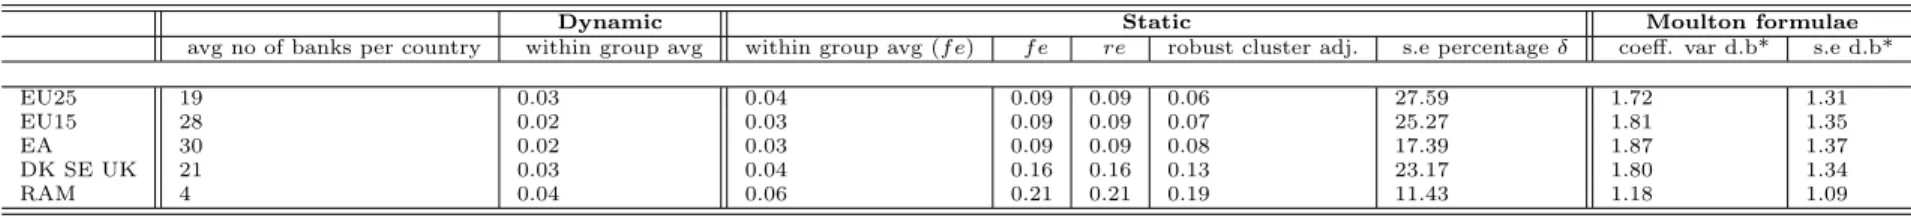 Table 3.8: Robustness Check: Within Group Correlations Summary.